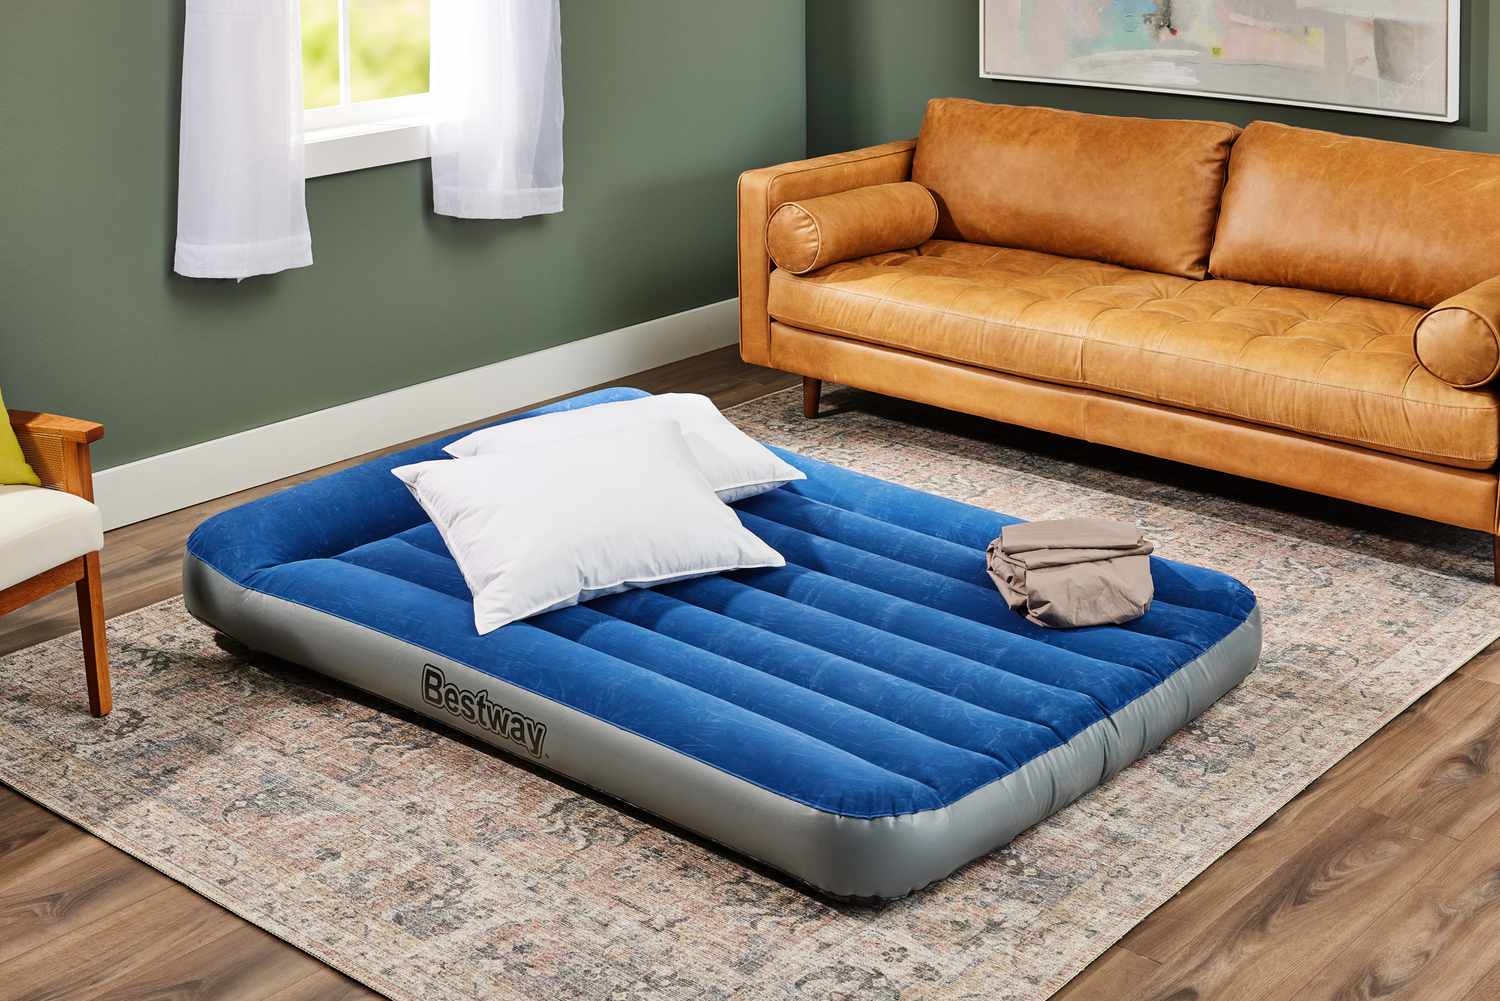 The Bestway Tritech Air Mattress with Built-in Pump after being inflated